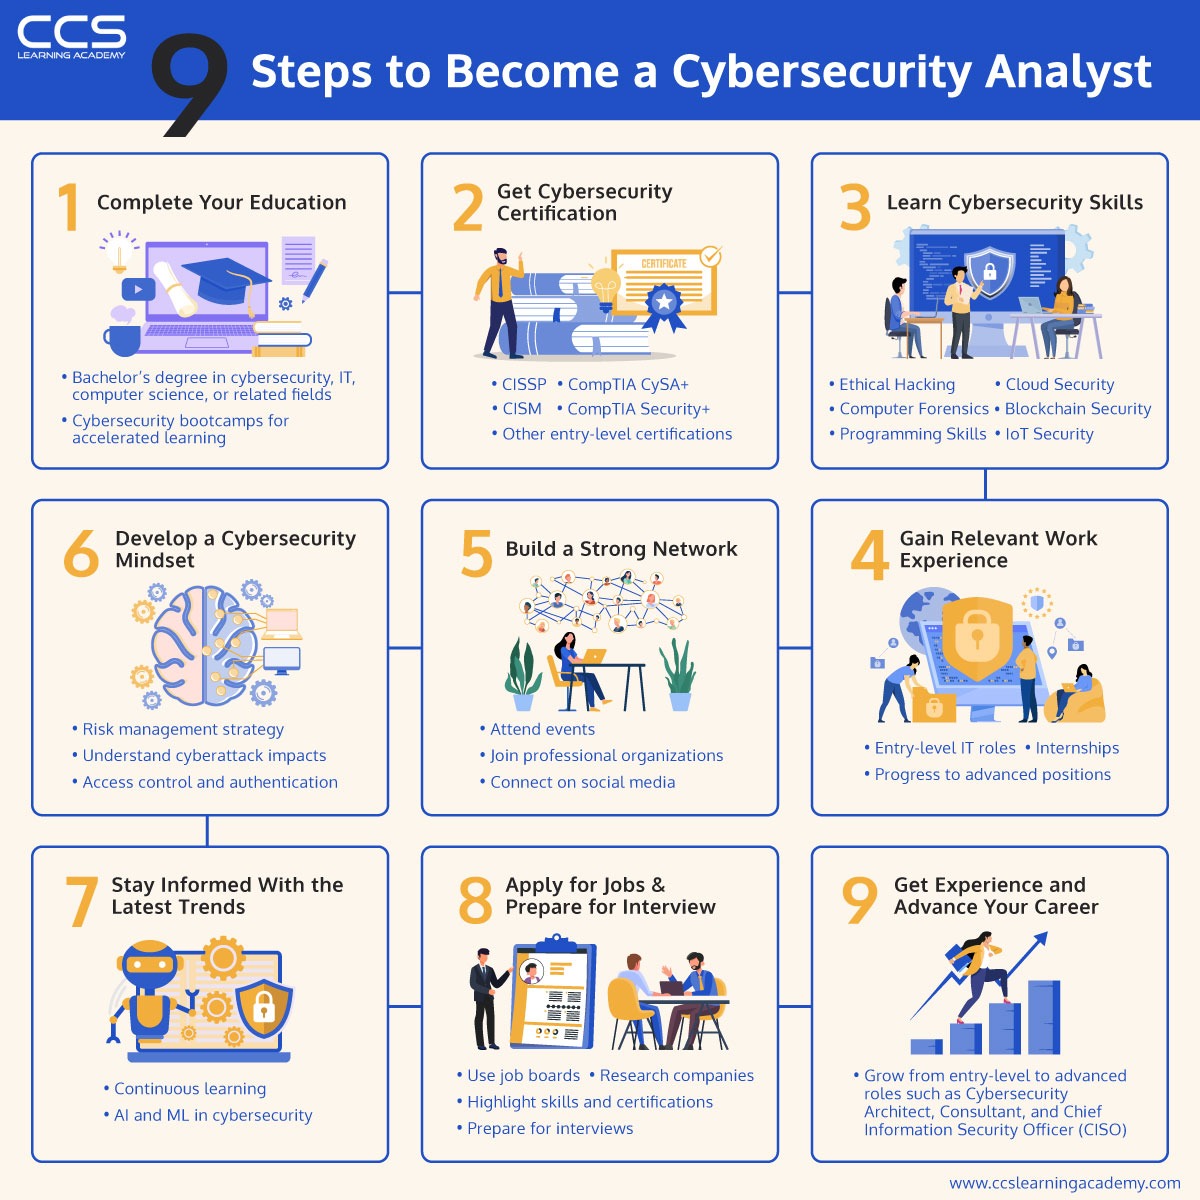 Steps to Become a Cybersecurity Analyst

Complete Your Education

* Bachelor's

Get Cybersecurity
Certification

<

Learn Cybersecurity Skills

 

   
   
  
 

Develop a Cybersecurity
Mindset

 

 

Manageme

tand cybe:

  

Stay Informed With the
Latest Trends

 

 

 

afi 2

 

nal organizations

social media

Apply for Jobs &
Prepare for Interview

Gain Relevant Work
Experience

any’

LJ eh

y-level IT

 

A EE var

 

Get Experience and
Advance Your Career

ion Security Officer (CISO)

 

 

gas